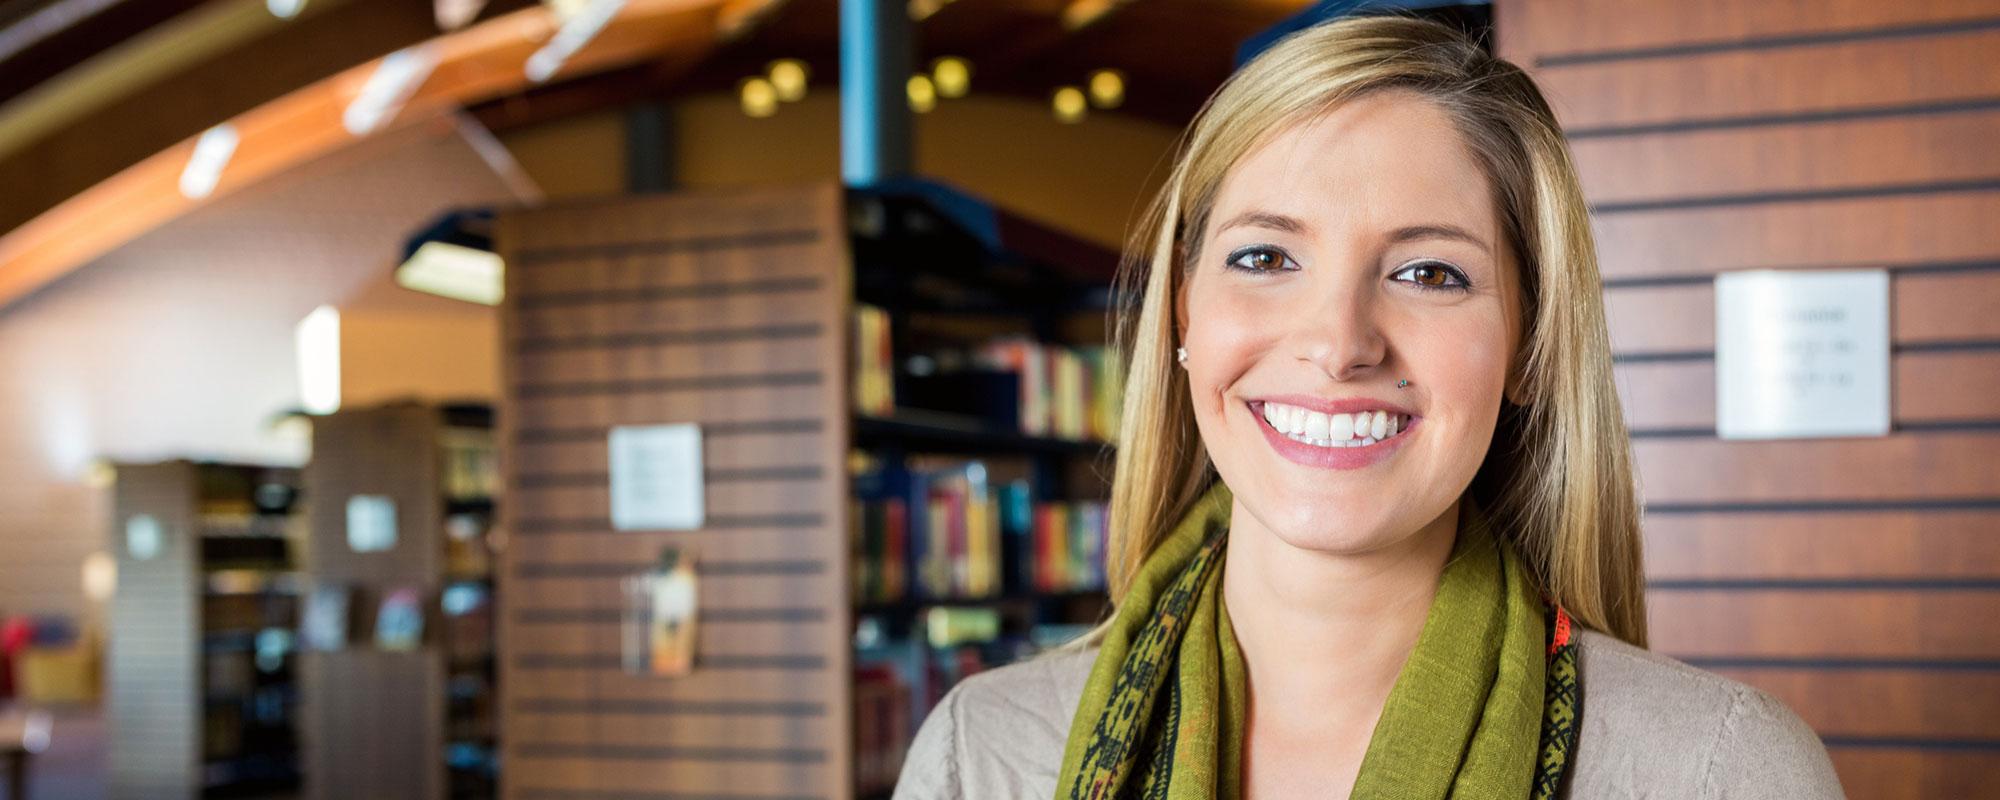 Woman standing in library smiling